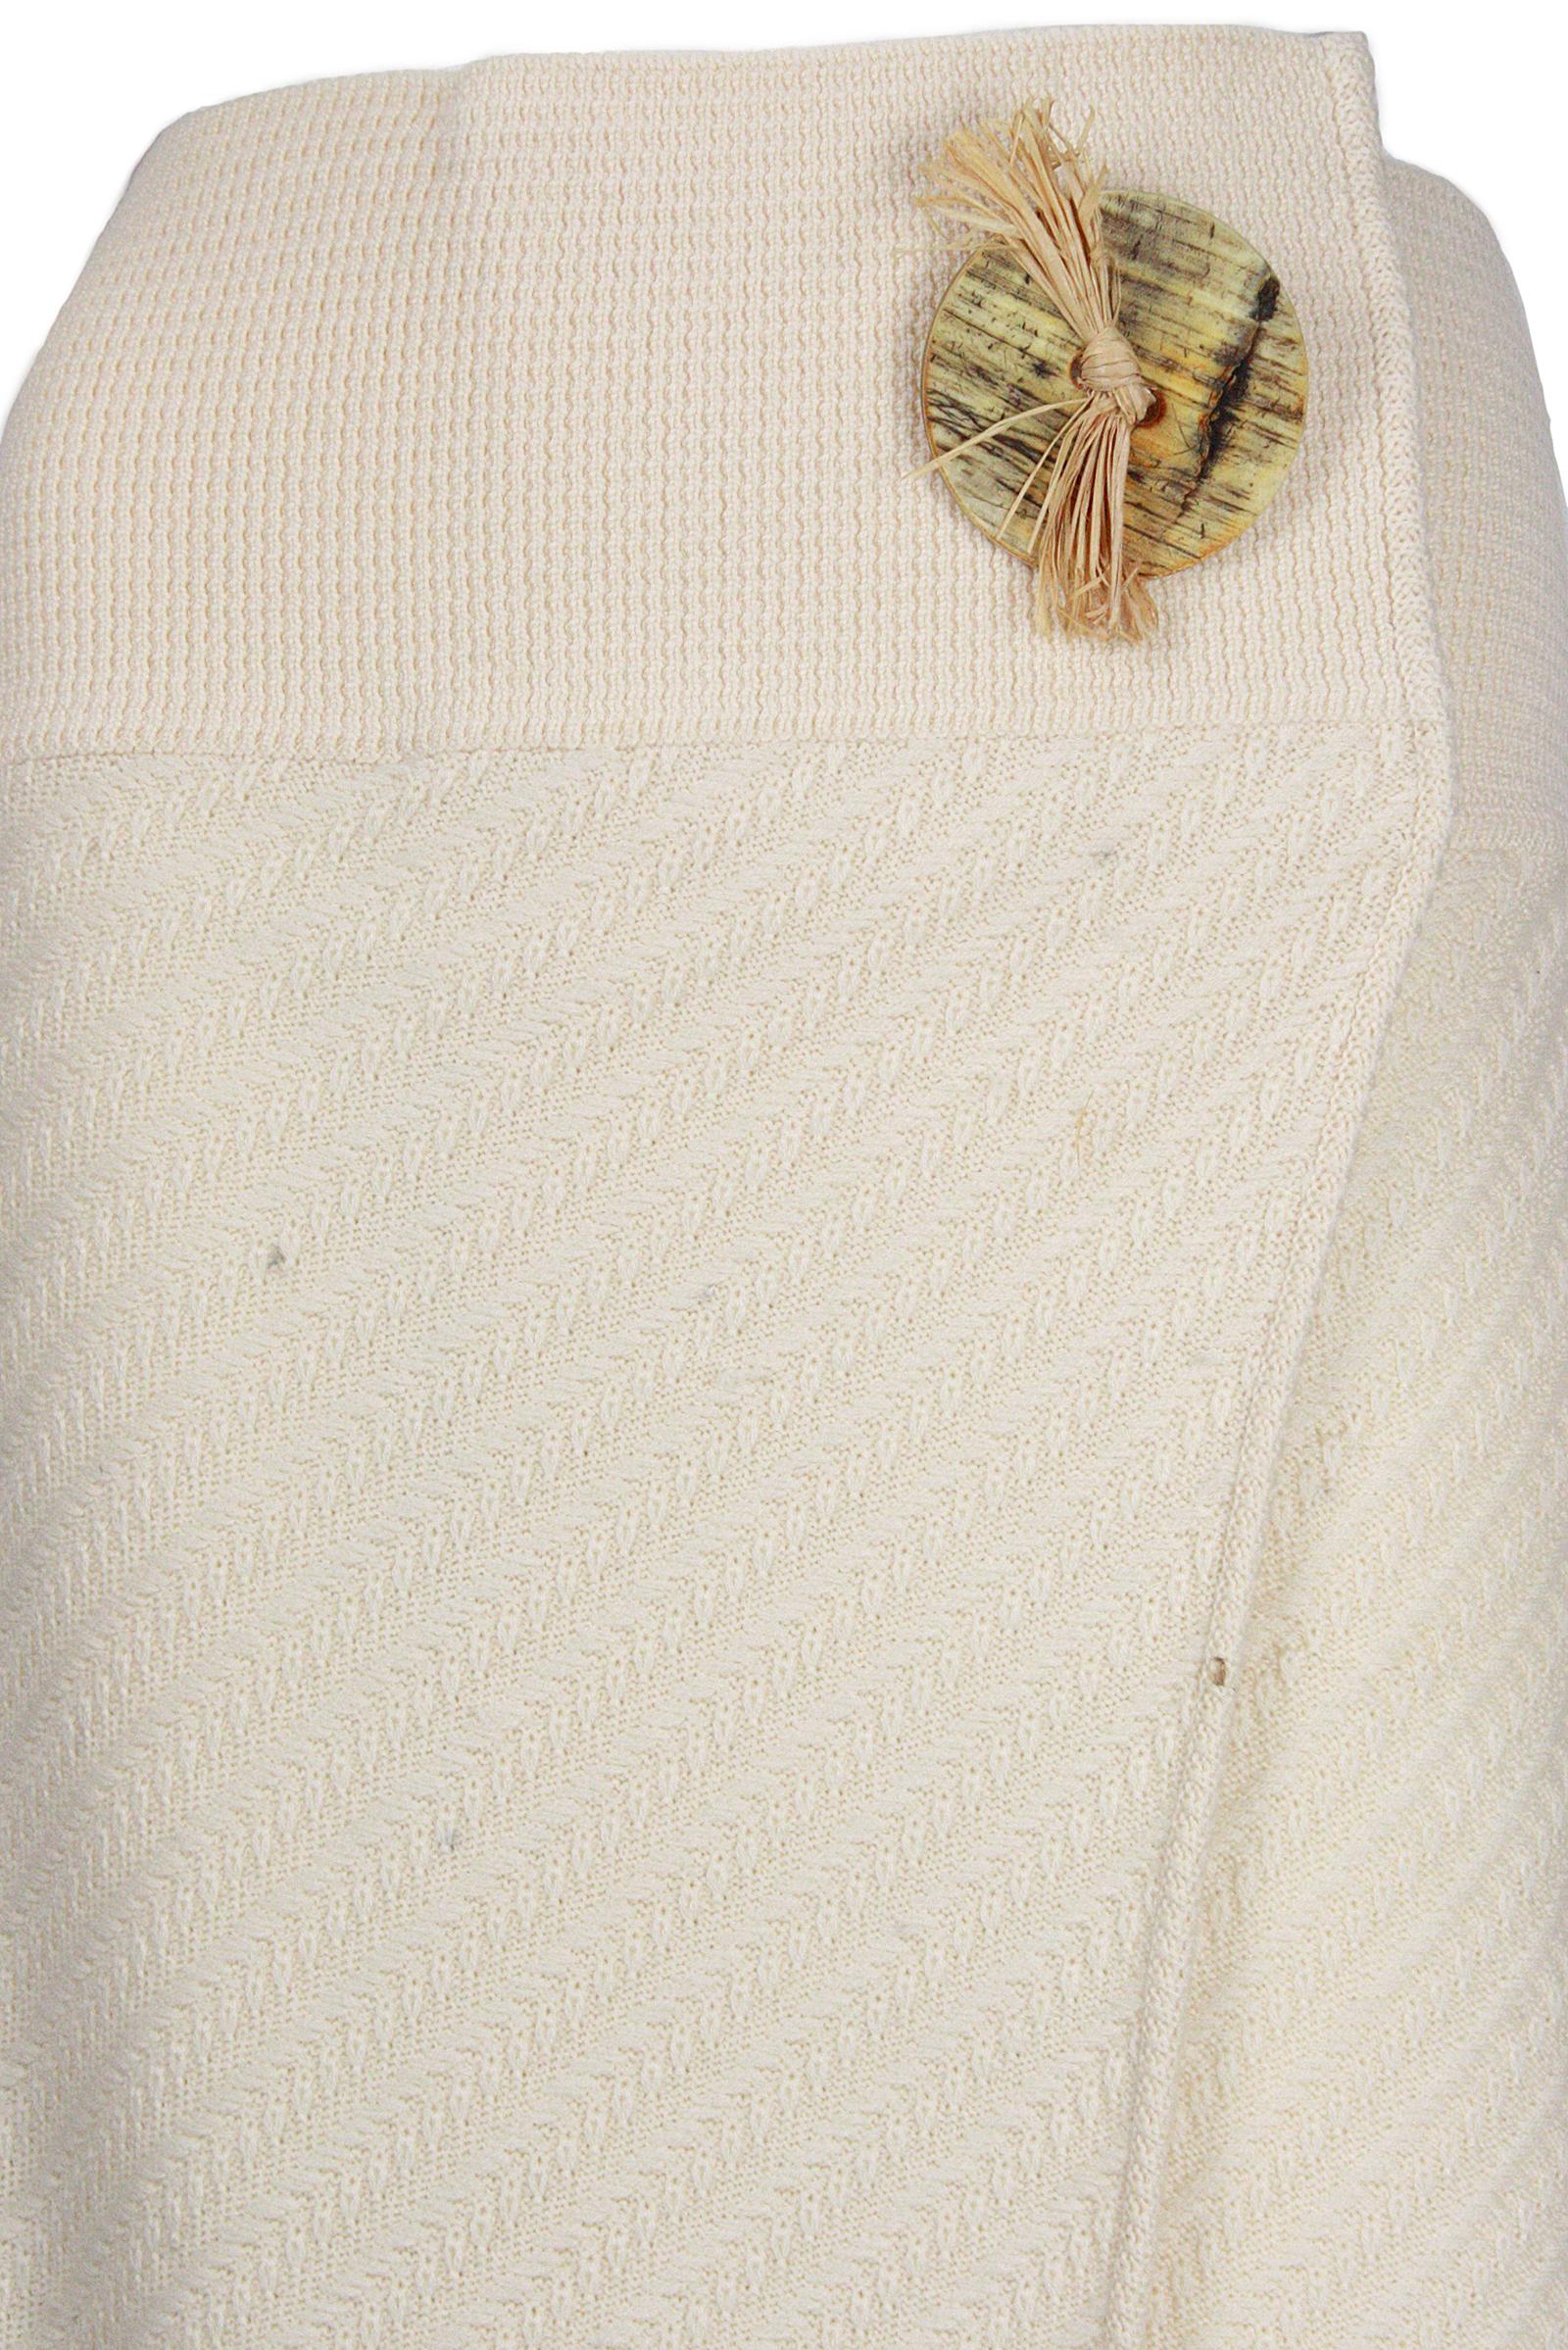 Beige 1990s John Galliano Cream Knit Wrap Skirt with Green Beads and Black Feathers